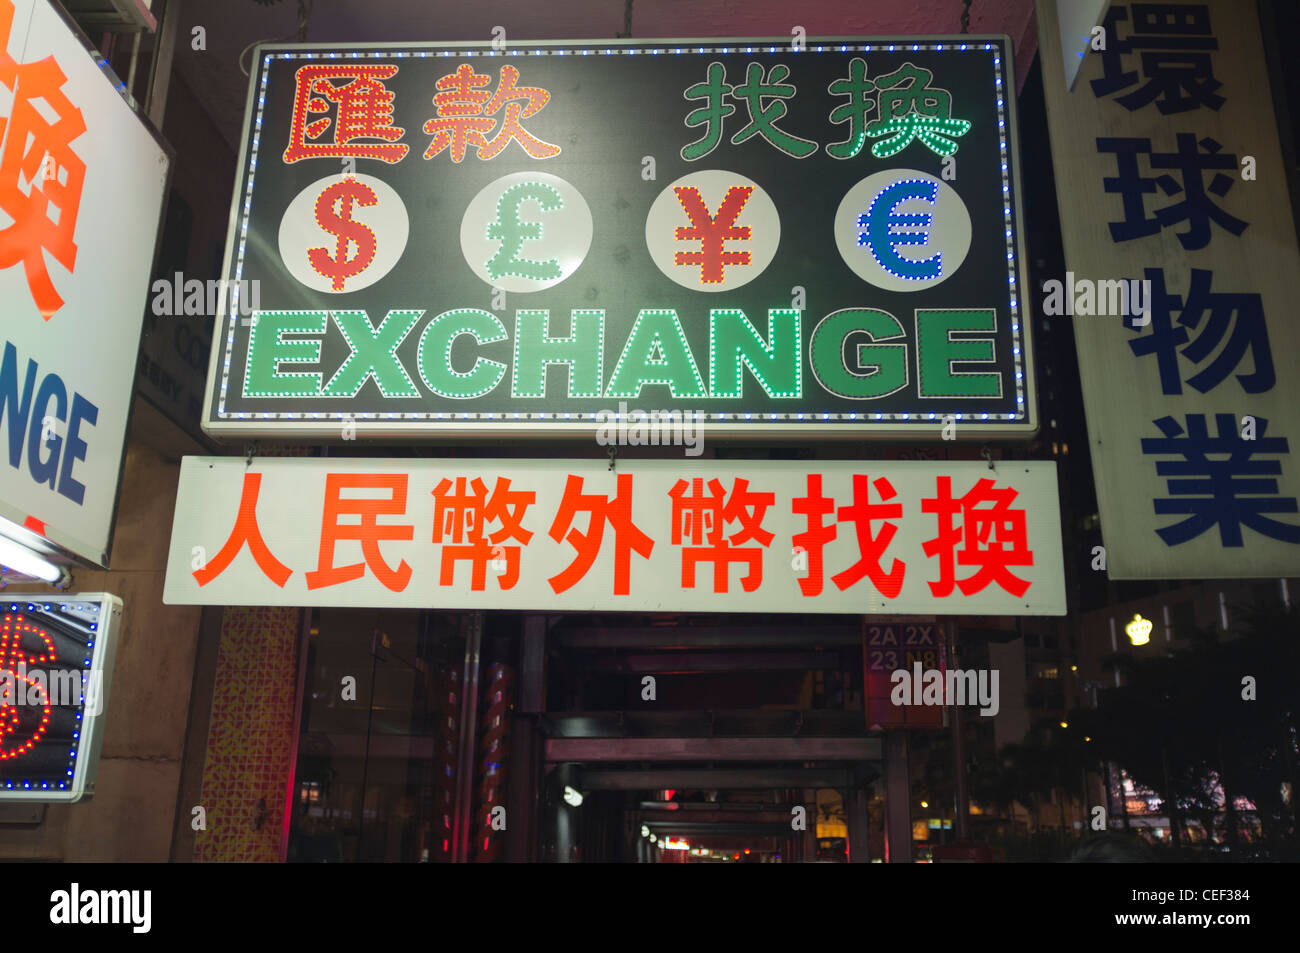 dh  FOREIGN EXCHANGE HONG KONG Foreign currency money exchange sign Chinese calligraphy and English asia Stock Photo